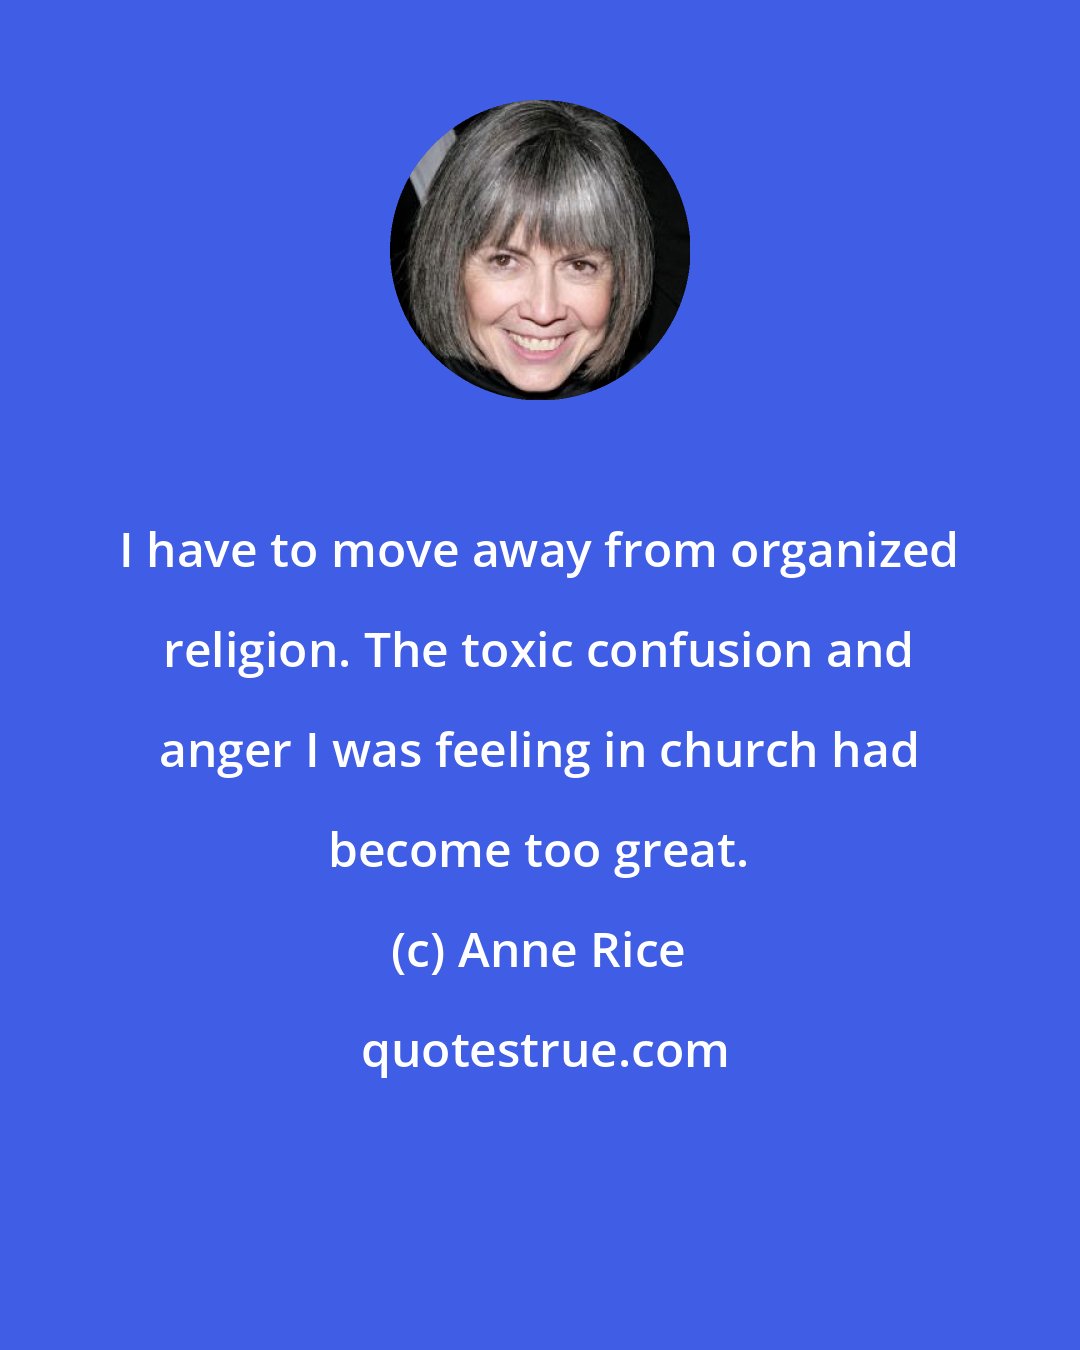 Anne Rice: I have to move away from organized religion. The toxic confusion and anger I was feeling in church had become too great.